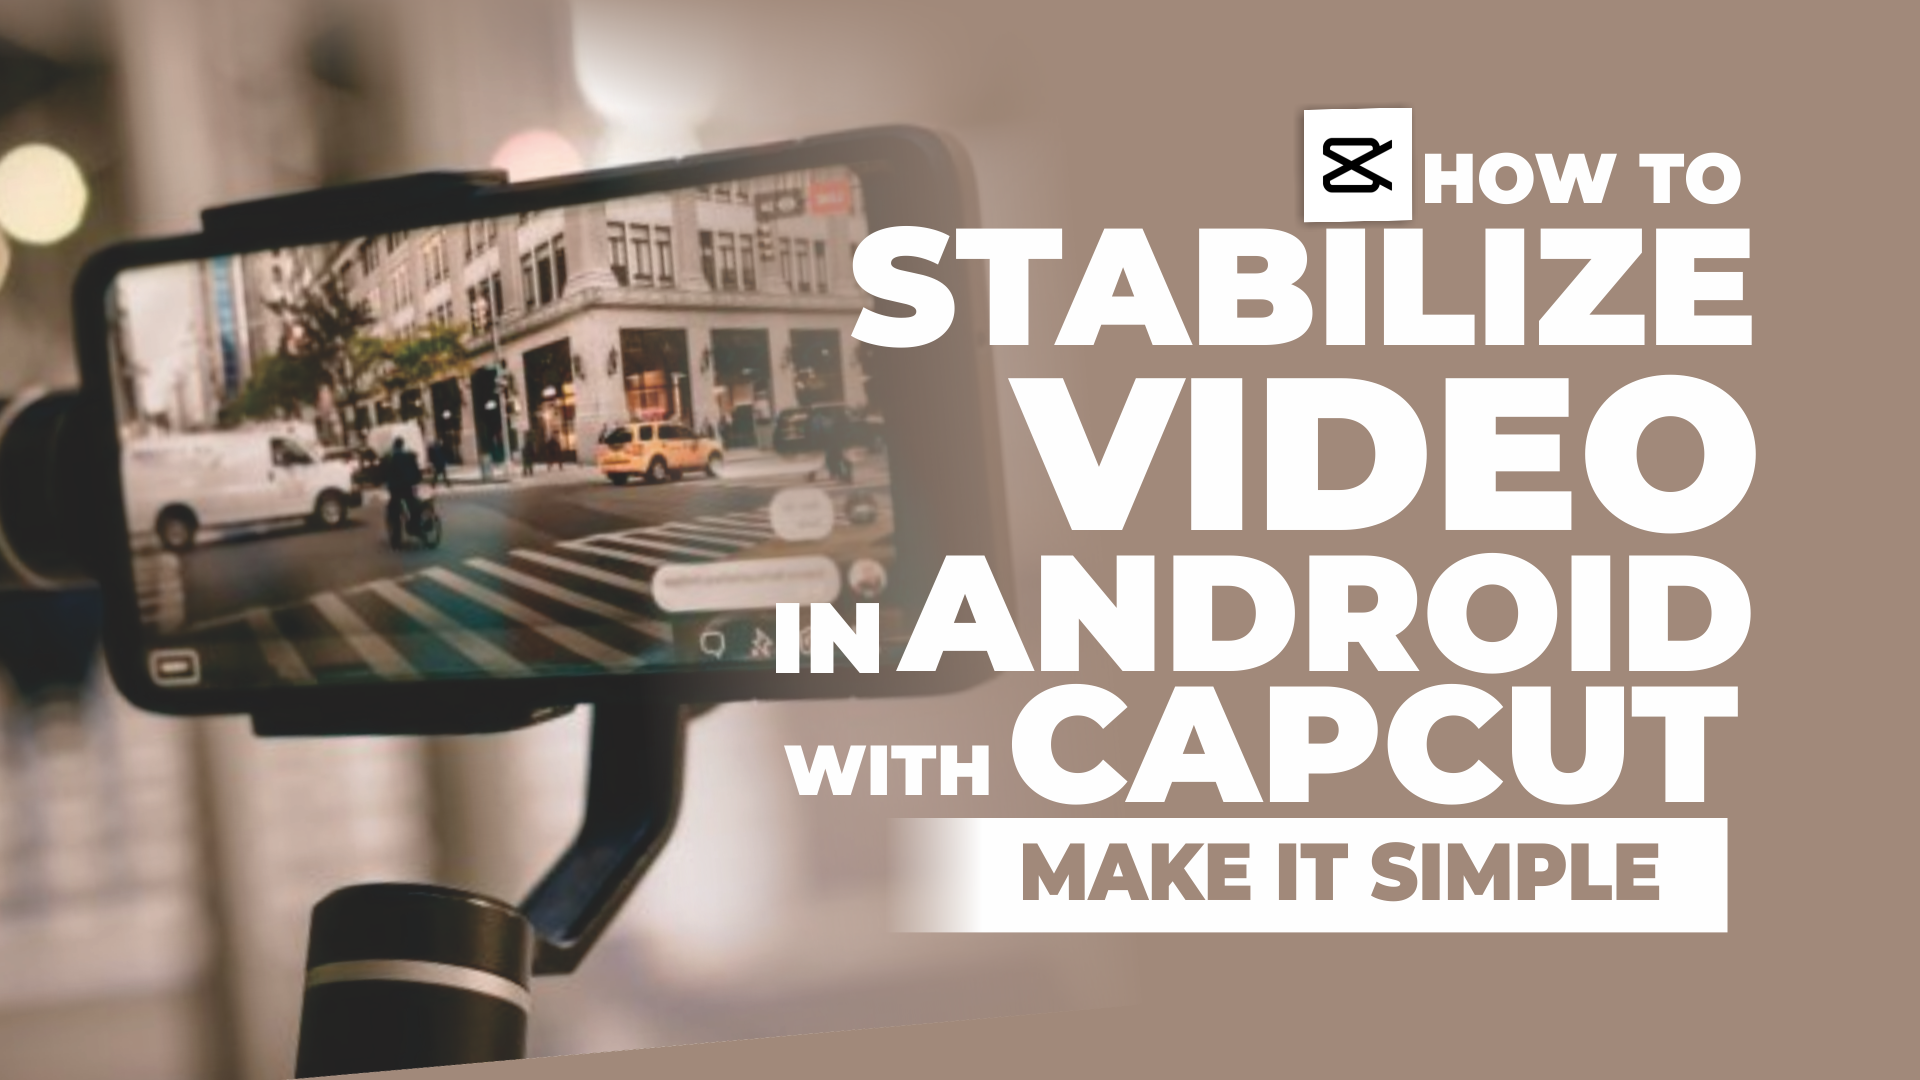 how to stabilize video on android using capcut app